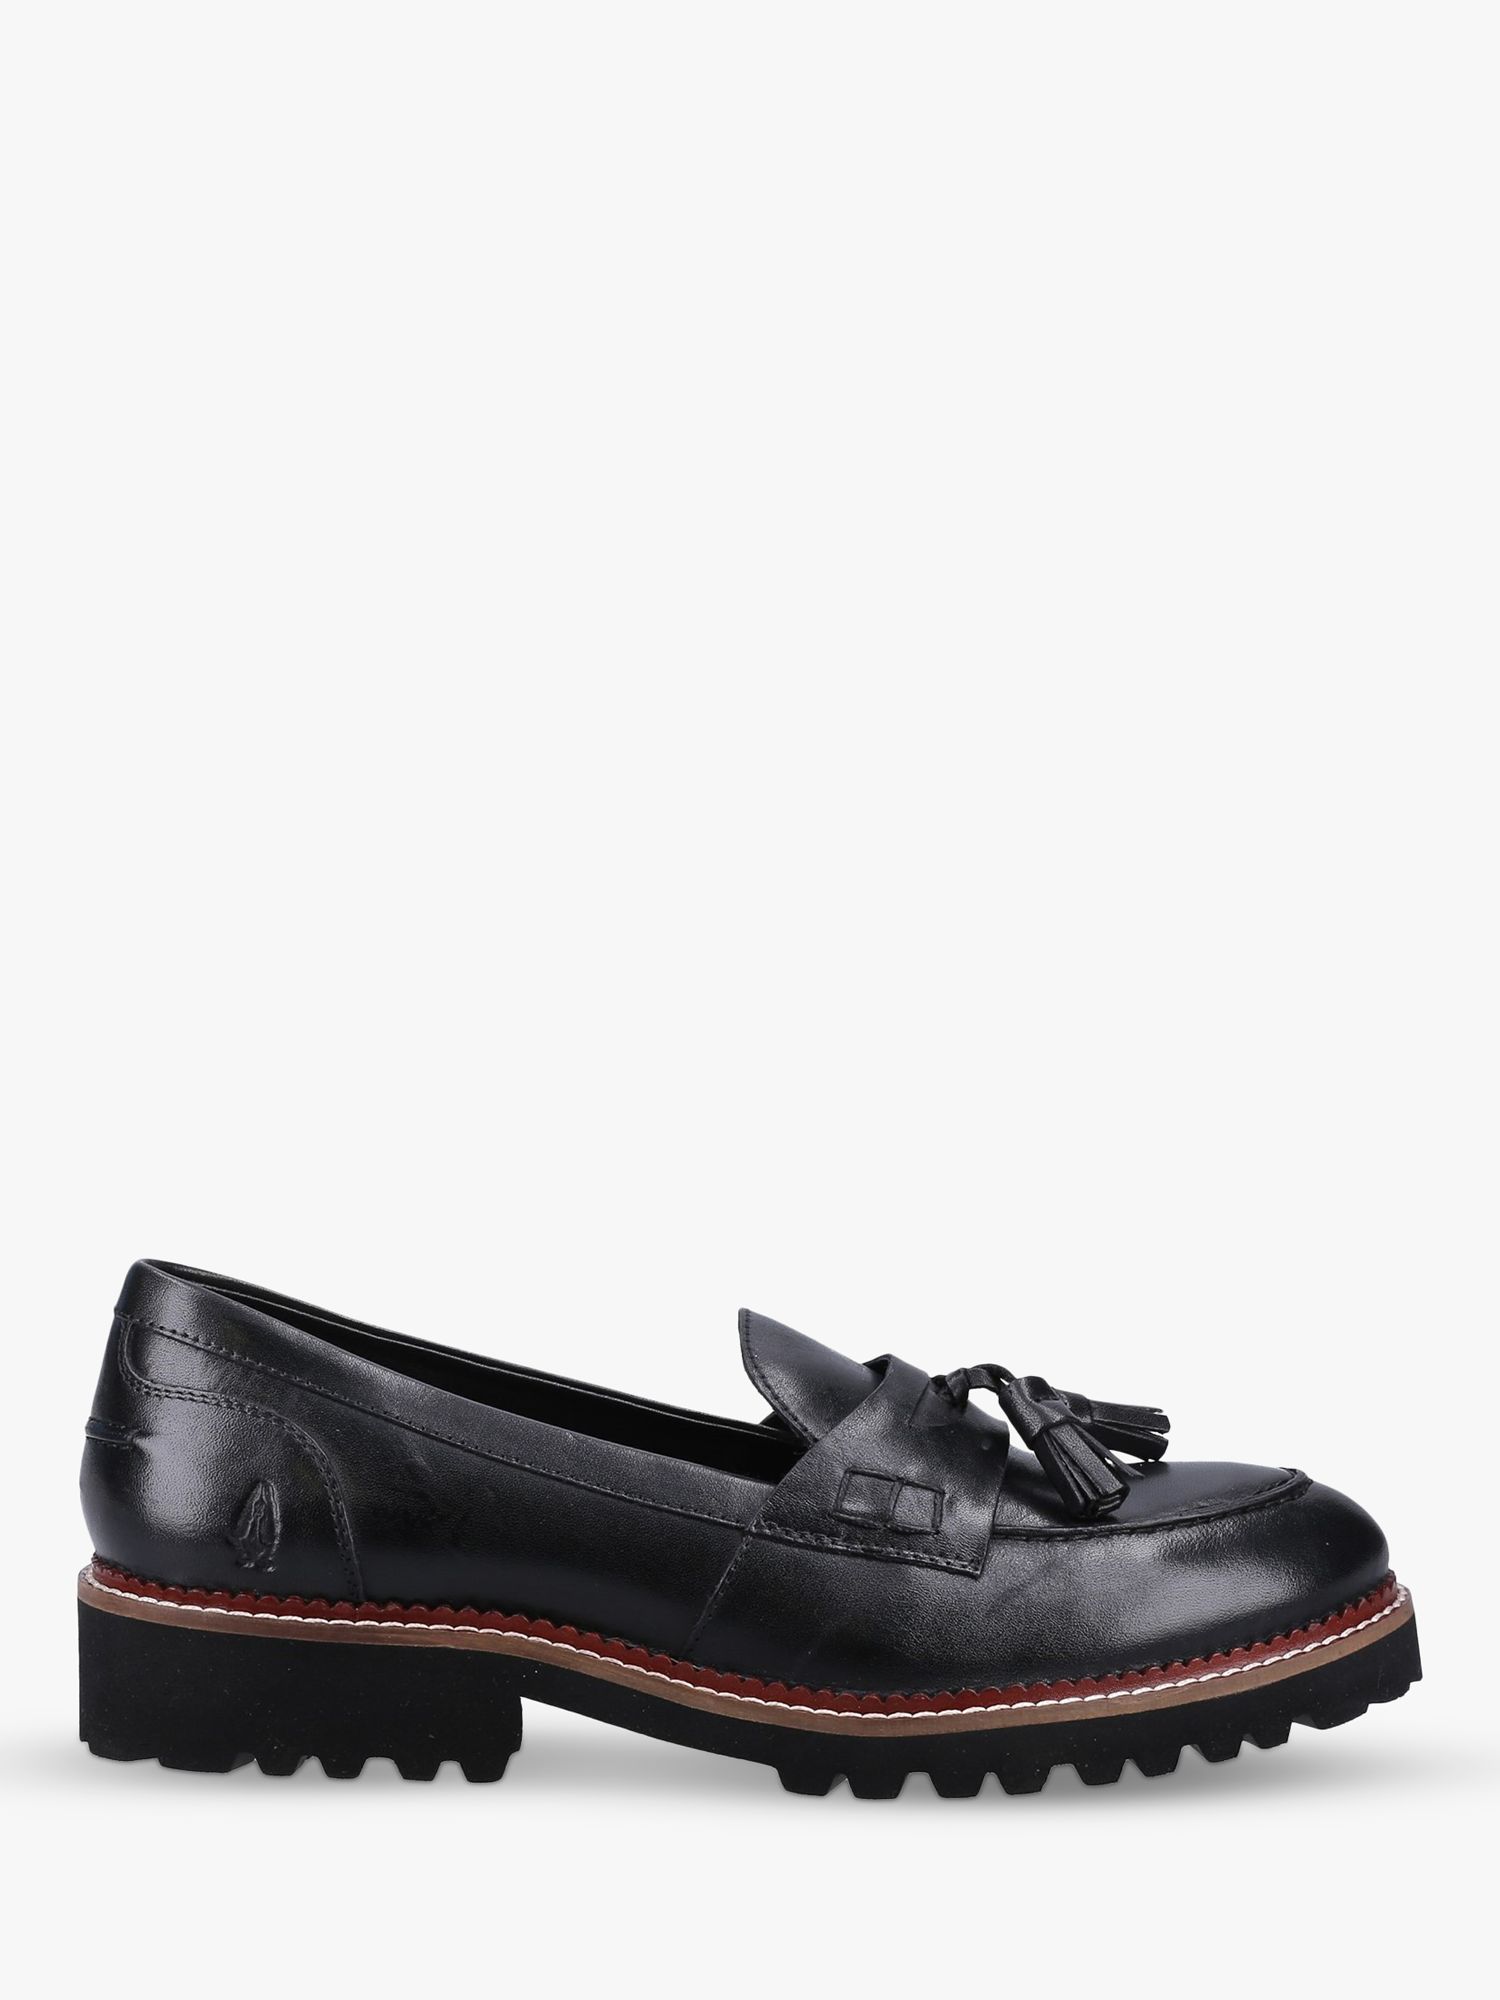 Hush Puppies Ginny Leather Loafers, Tan at John Lewis & Partners